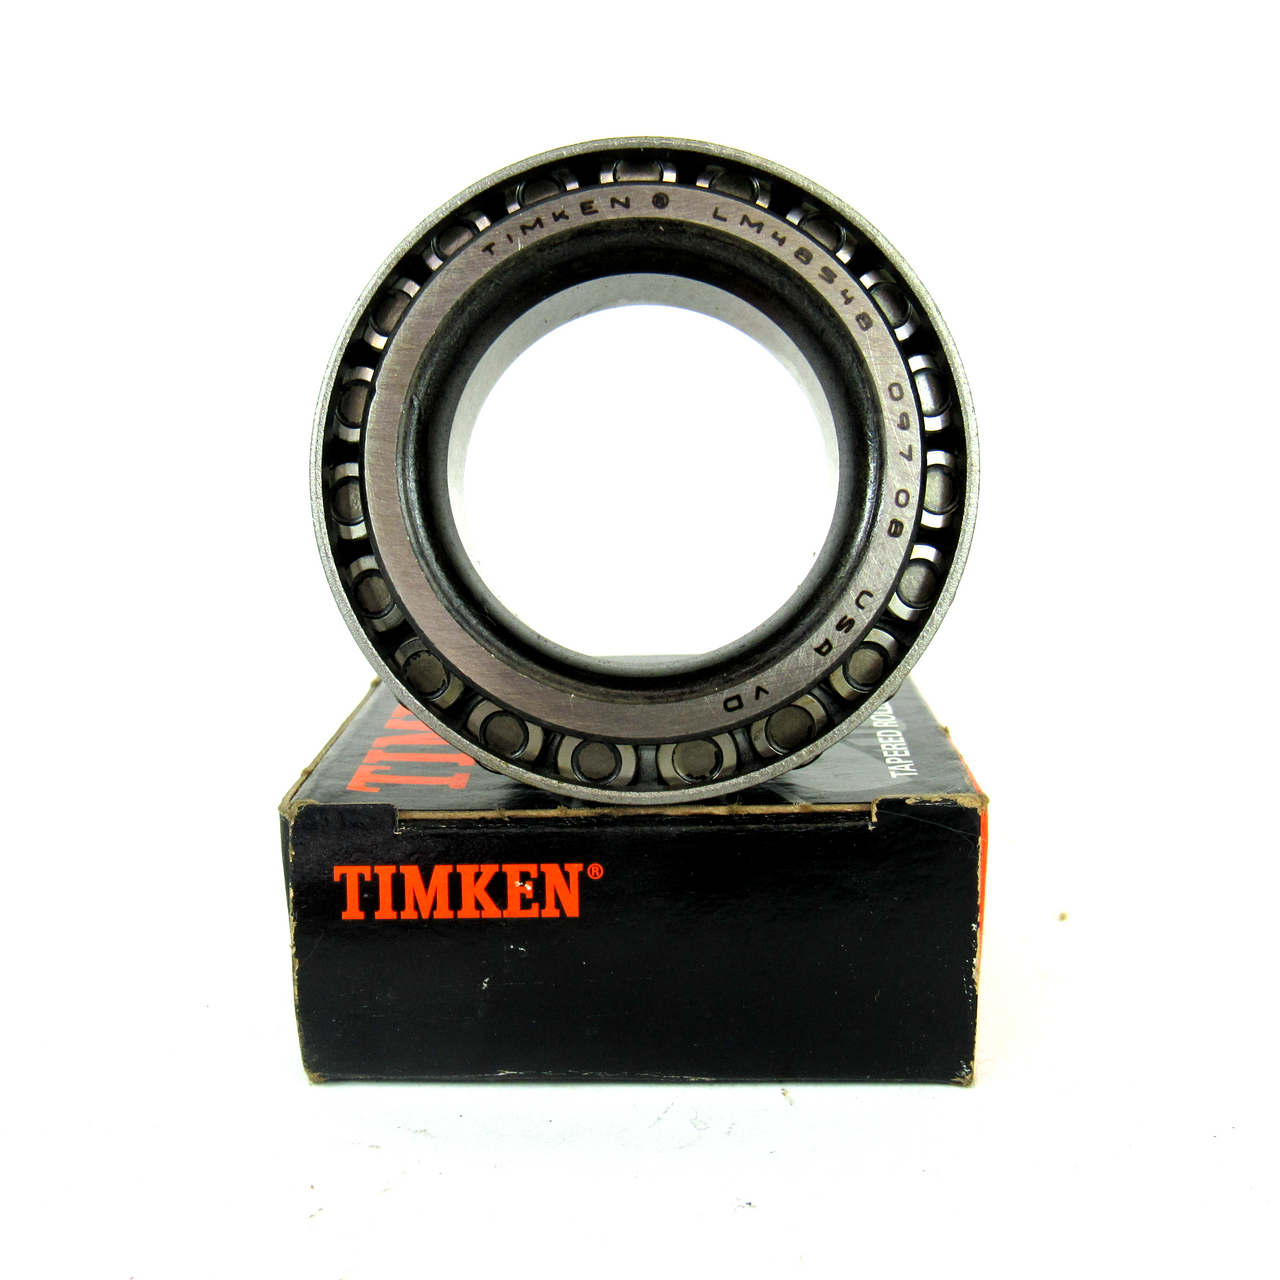 Timken LM48548 Tapered Roller Bearing, 1 3/8" d Bore